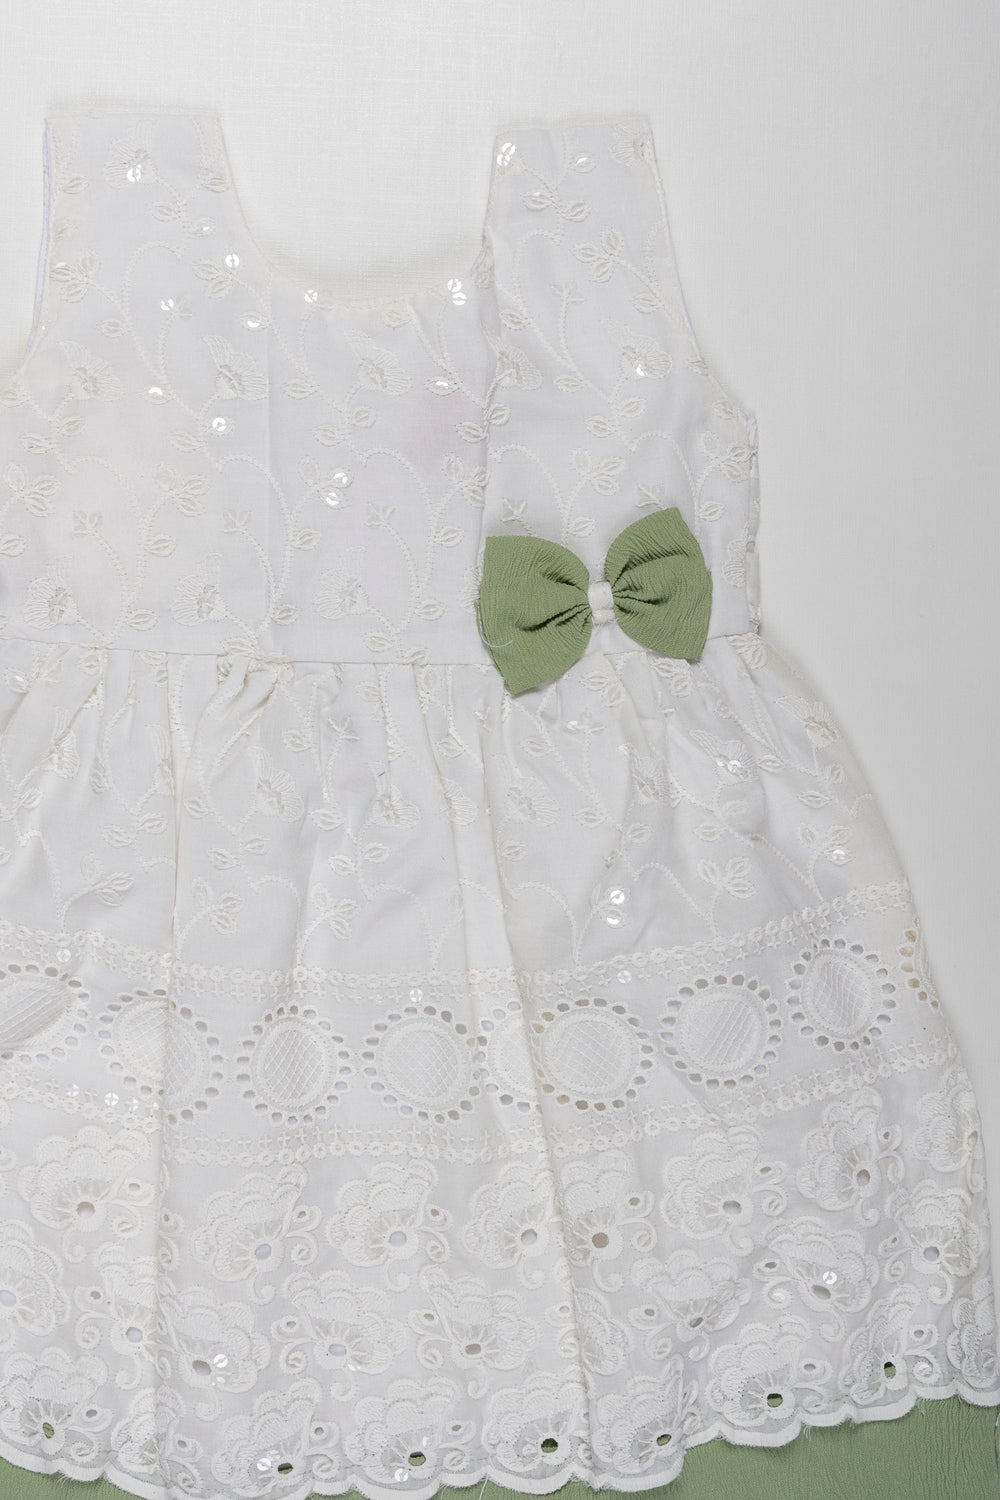 The Nesavu Girls Cotton Frock Girls Ethereal Chikan Embroidered Cotton Frock with Delicate Lace Trim Nesavu Chikan Embroidered Cotton Frocks for Girls | Timeless Elegance | The Nesavu